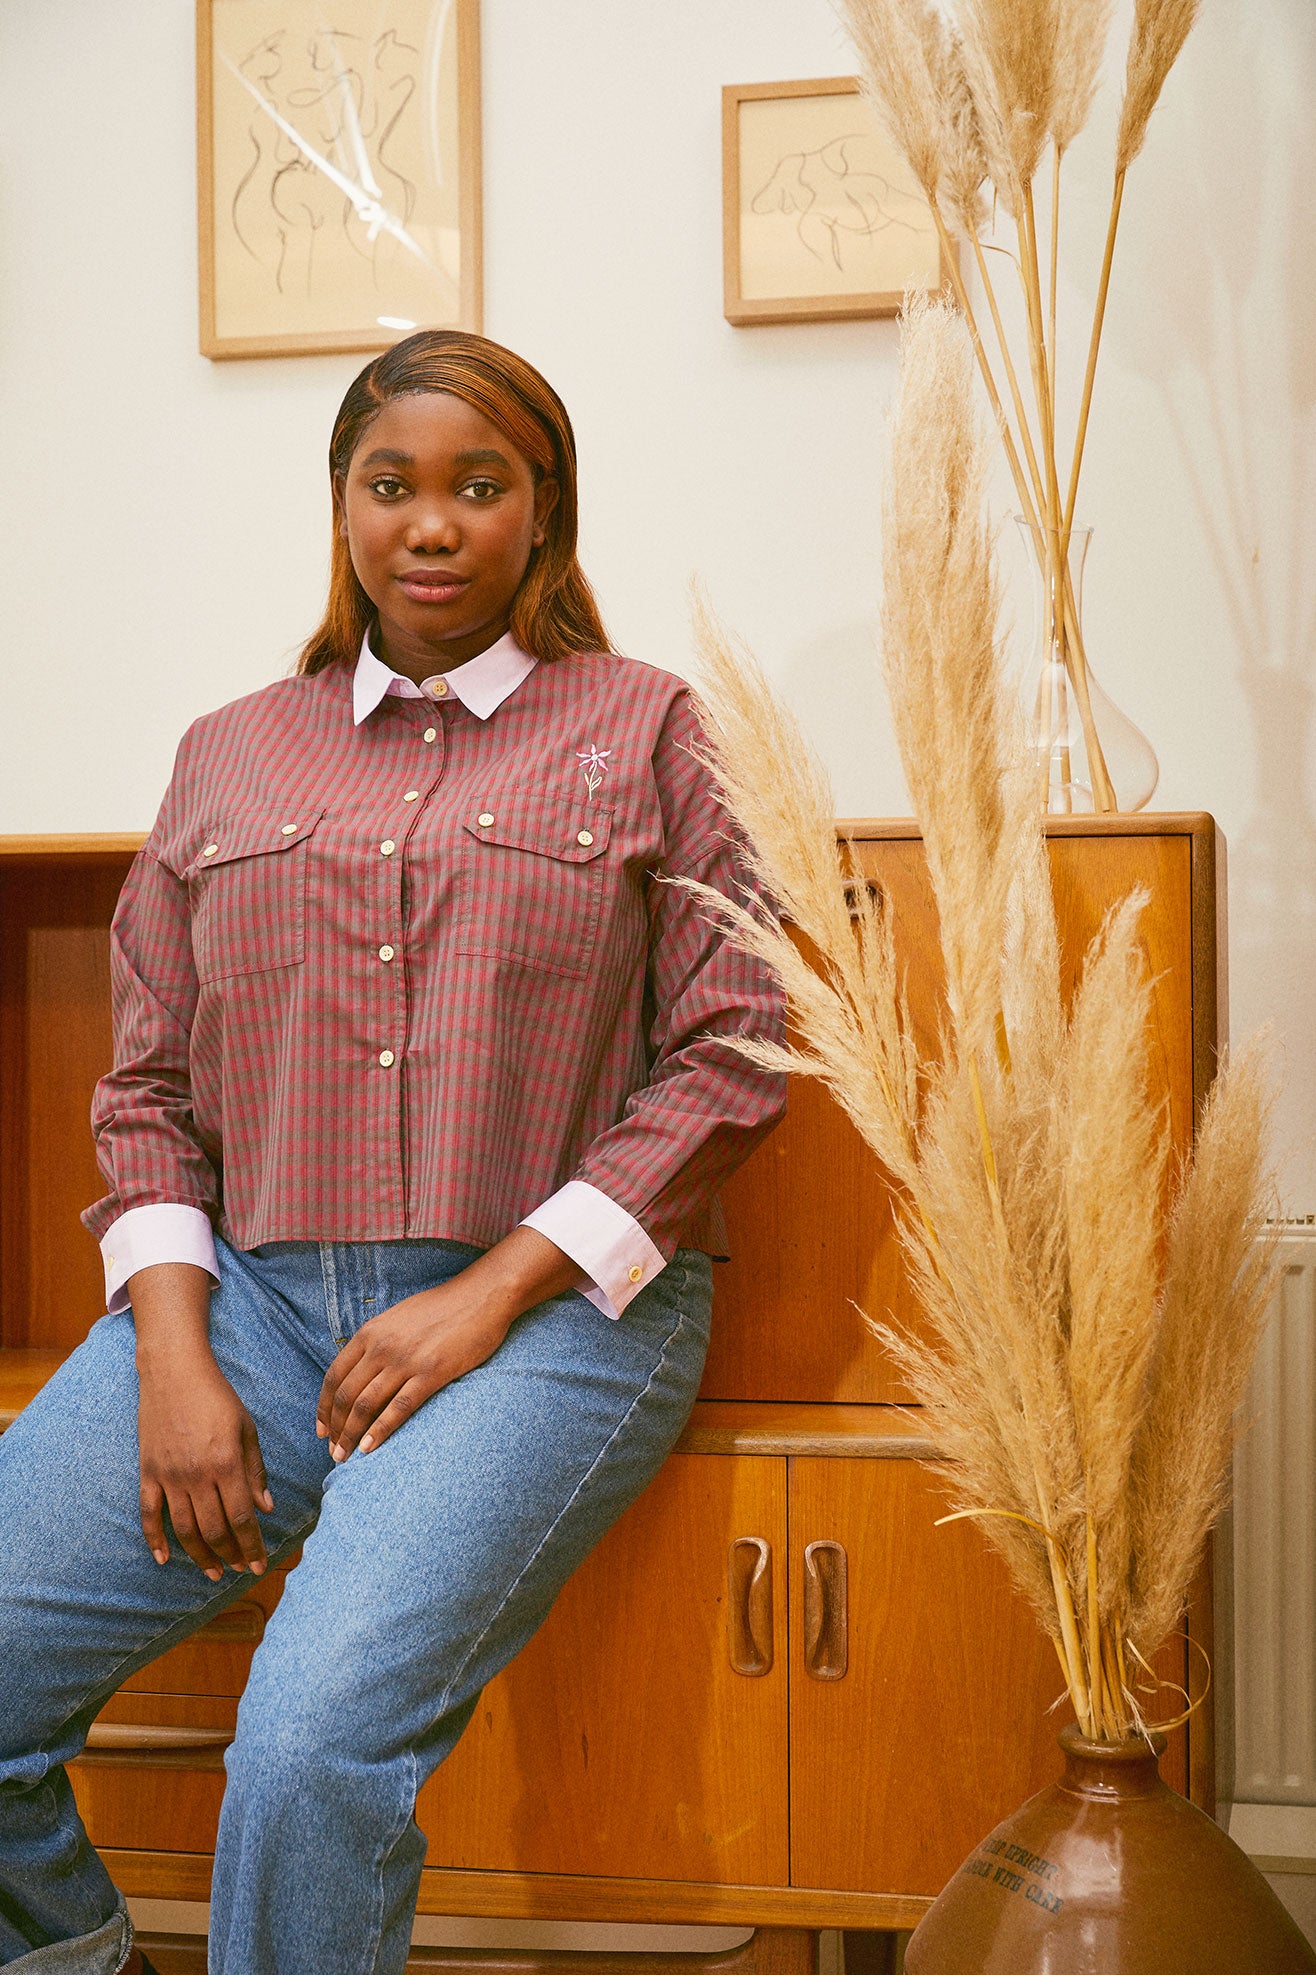 Saywood deadstock cotton Jules Utility Shirt in red check worn with jeans by model leaning against a mid century cupboard unit, with pampas grass  in a vintage vase to the right